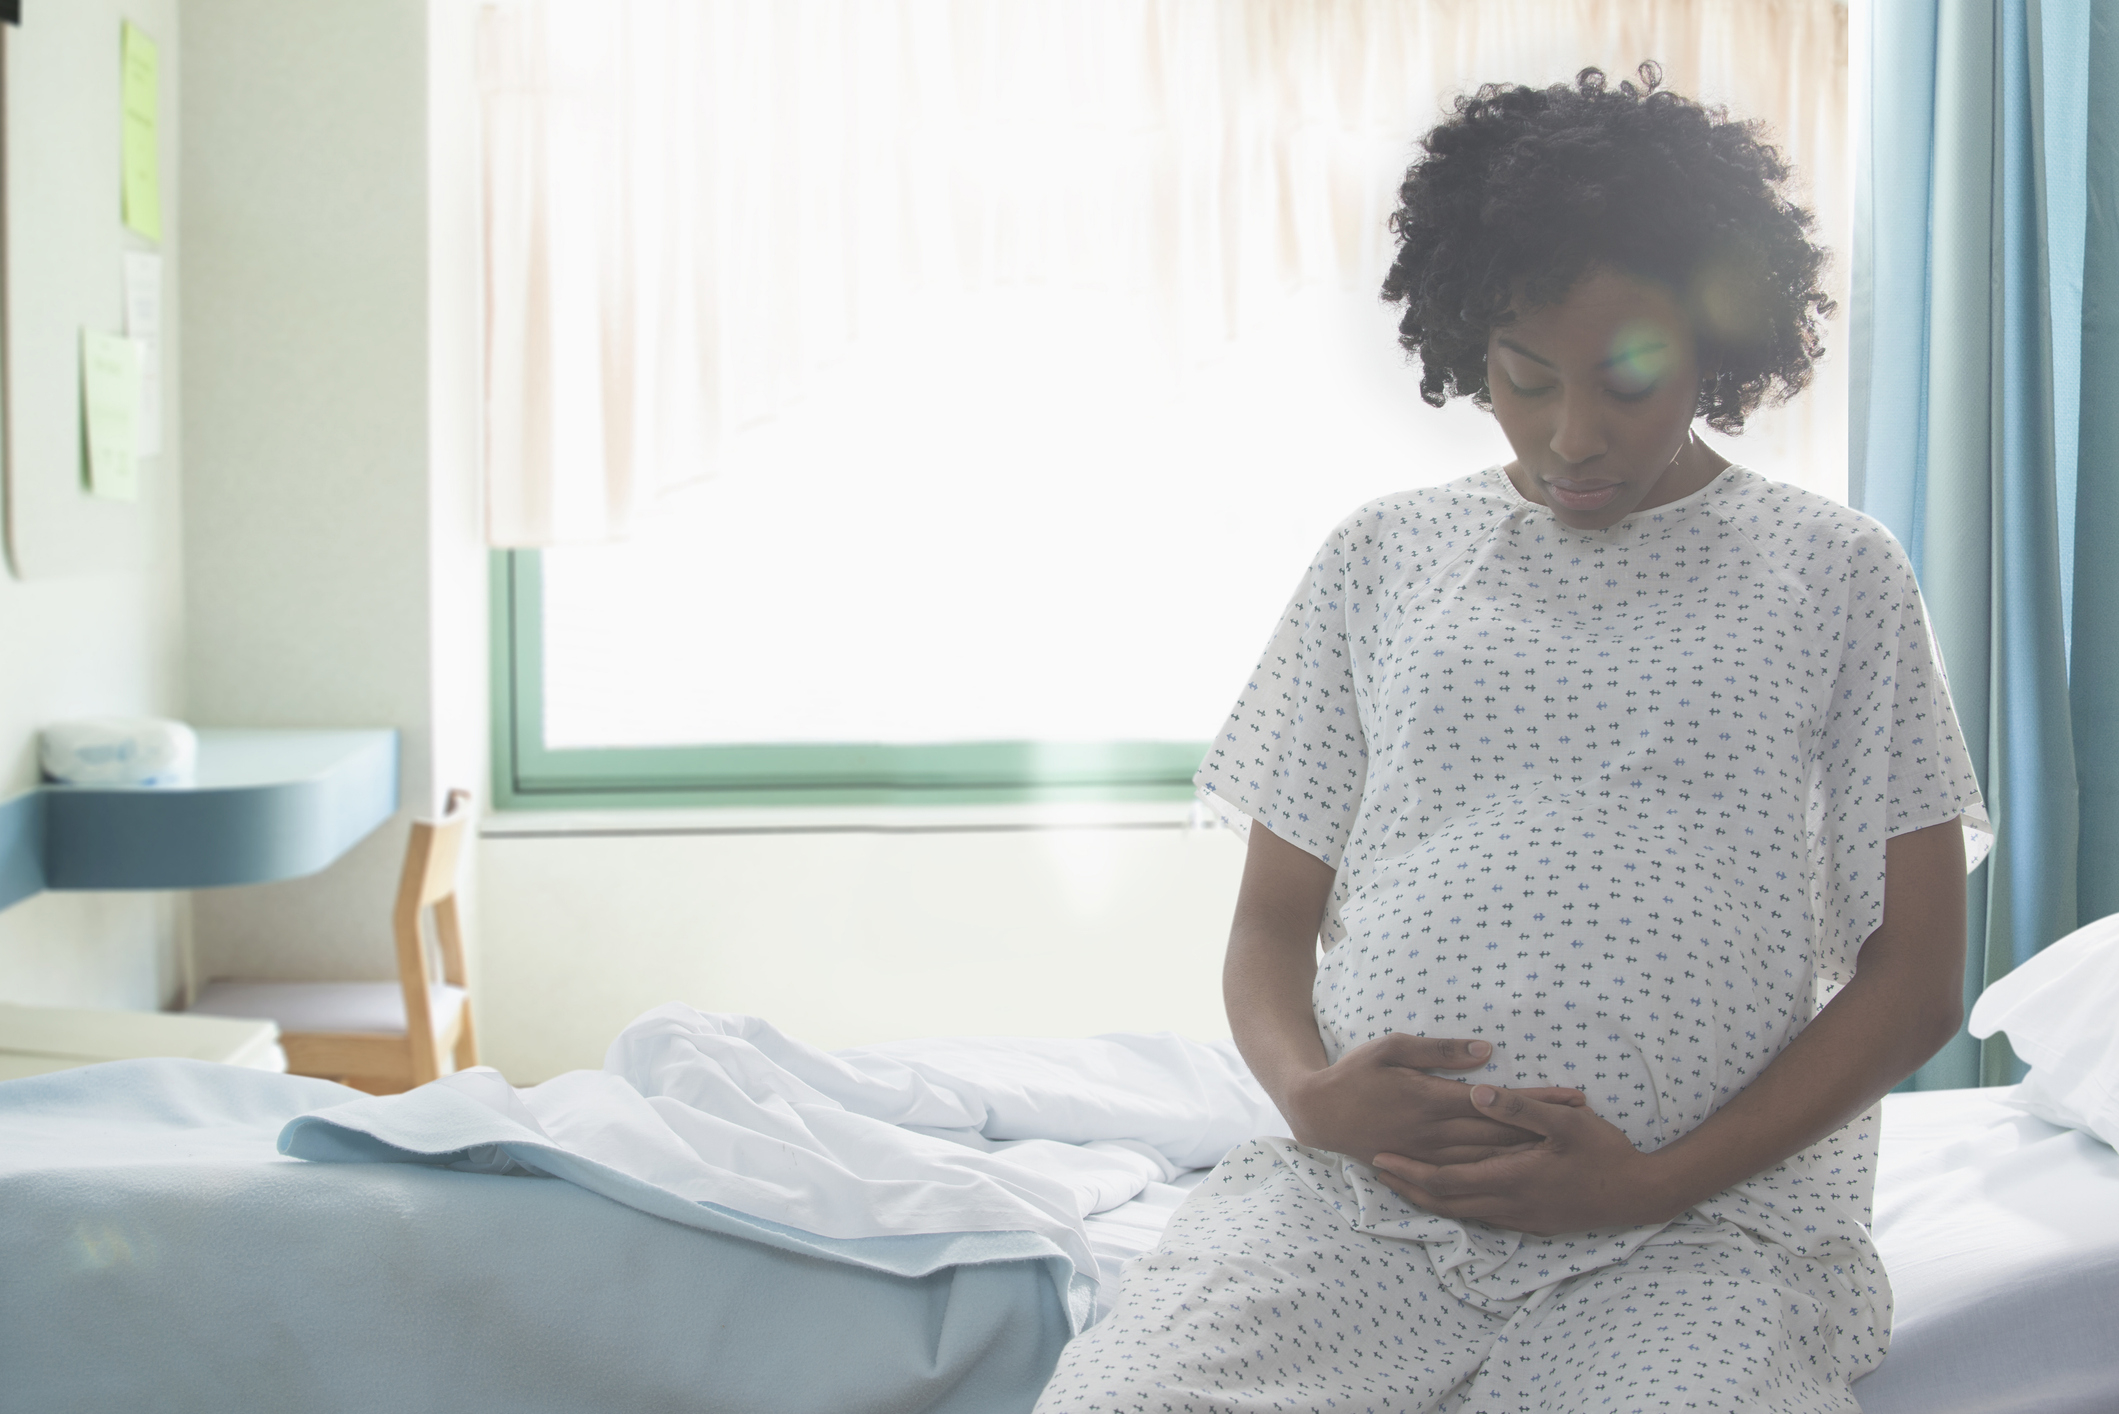 Pregnant person sitting on hospital bed, resting hand on belly, contemplative expression, hospital gown worn